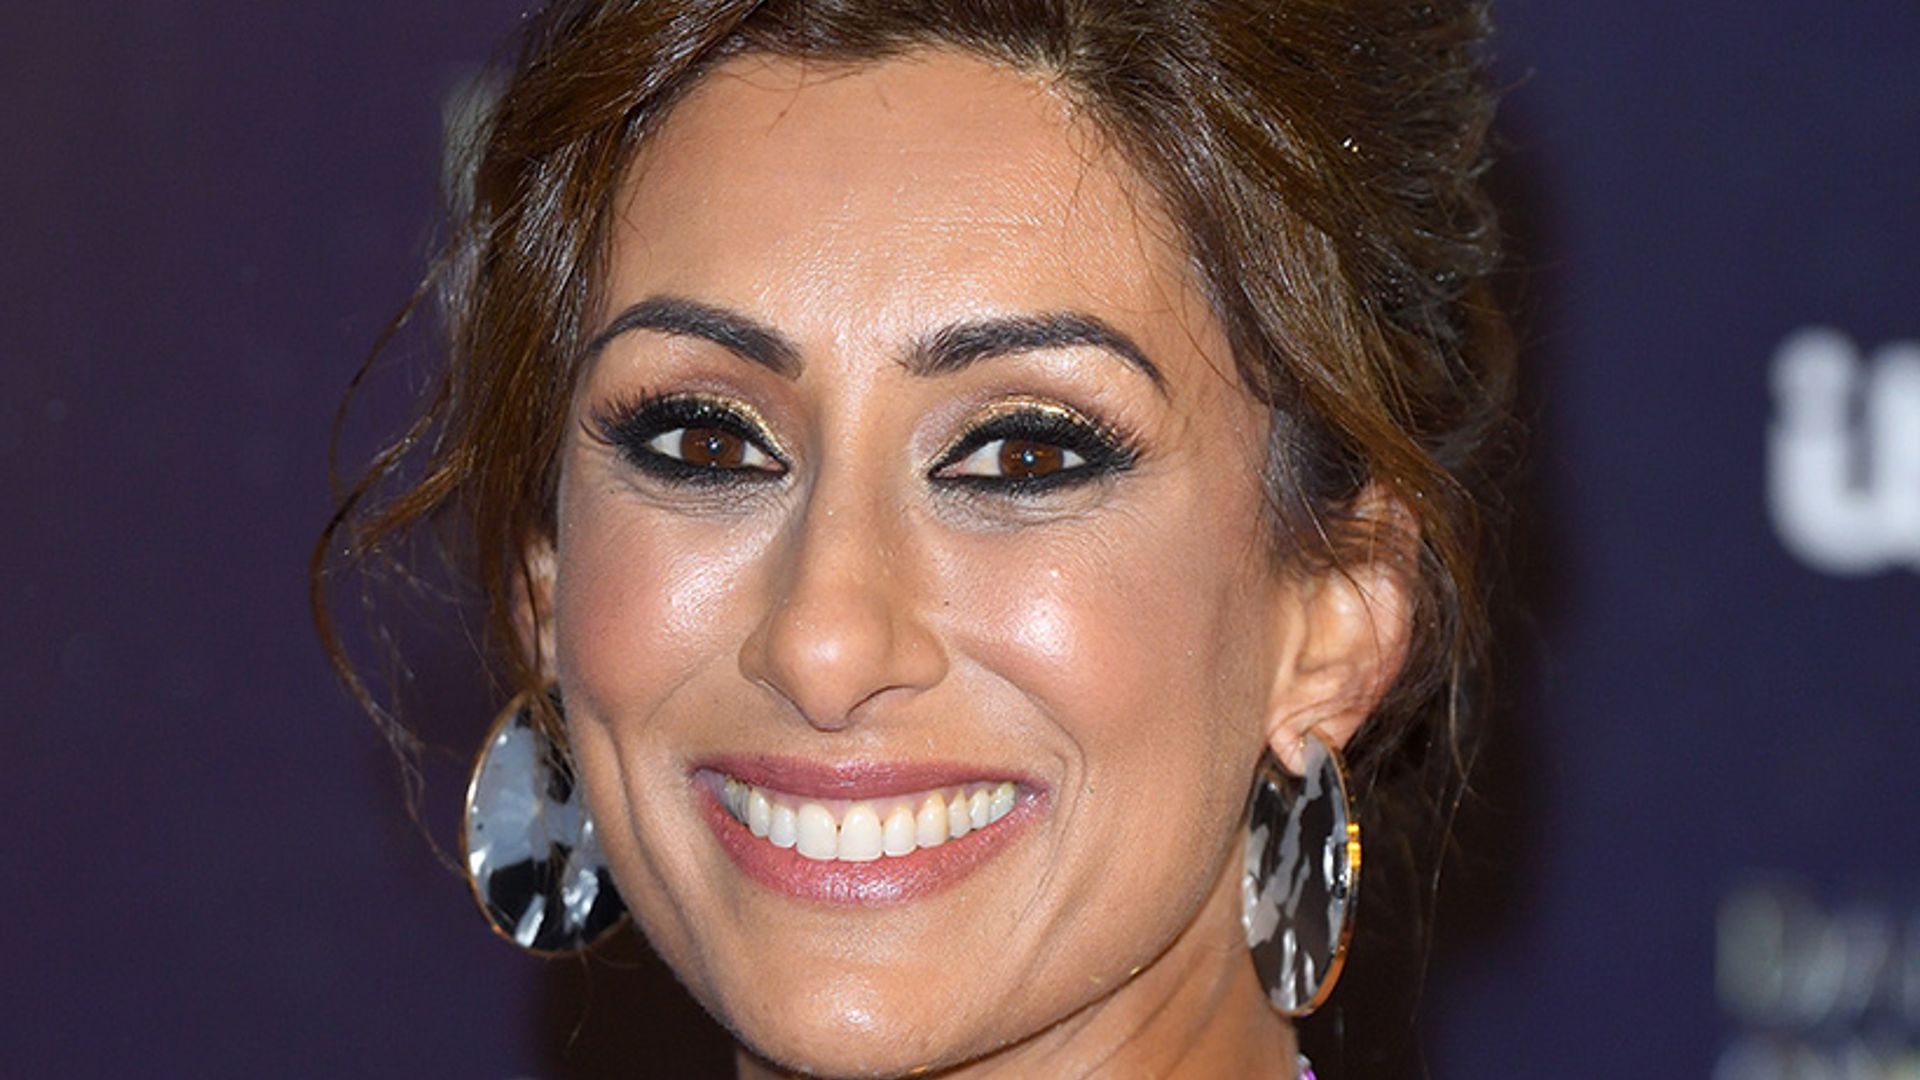 Saira Khan's Marks & Spencer camel shirt dress is the most classic style ever